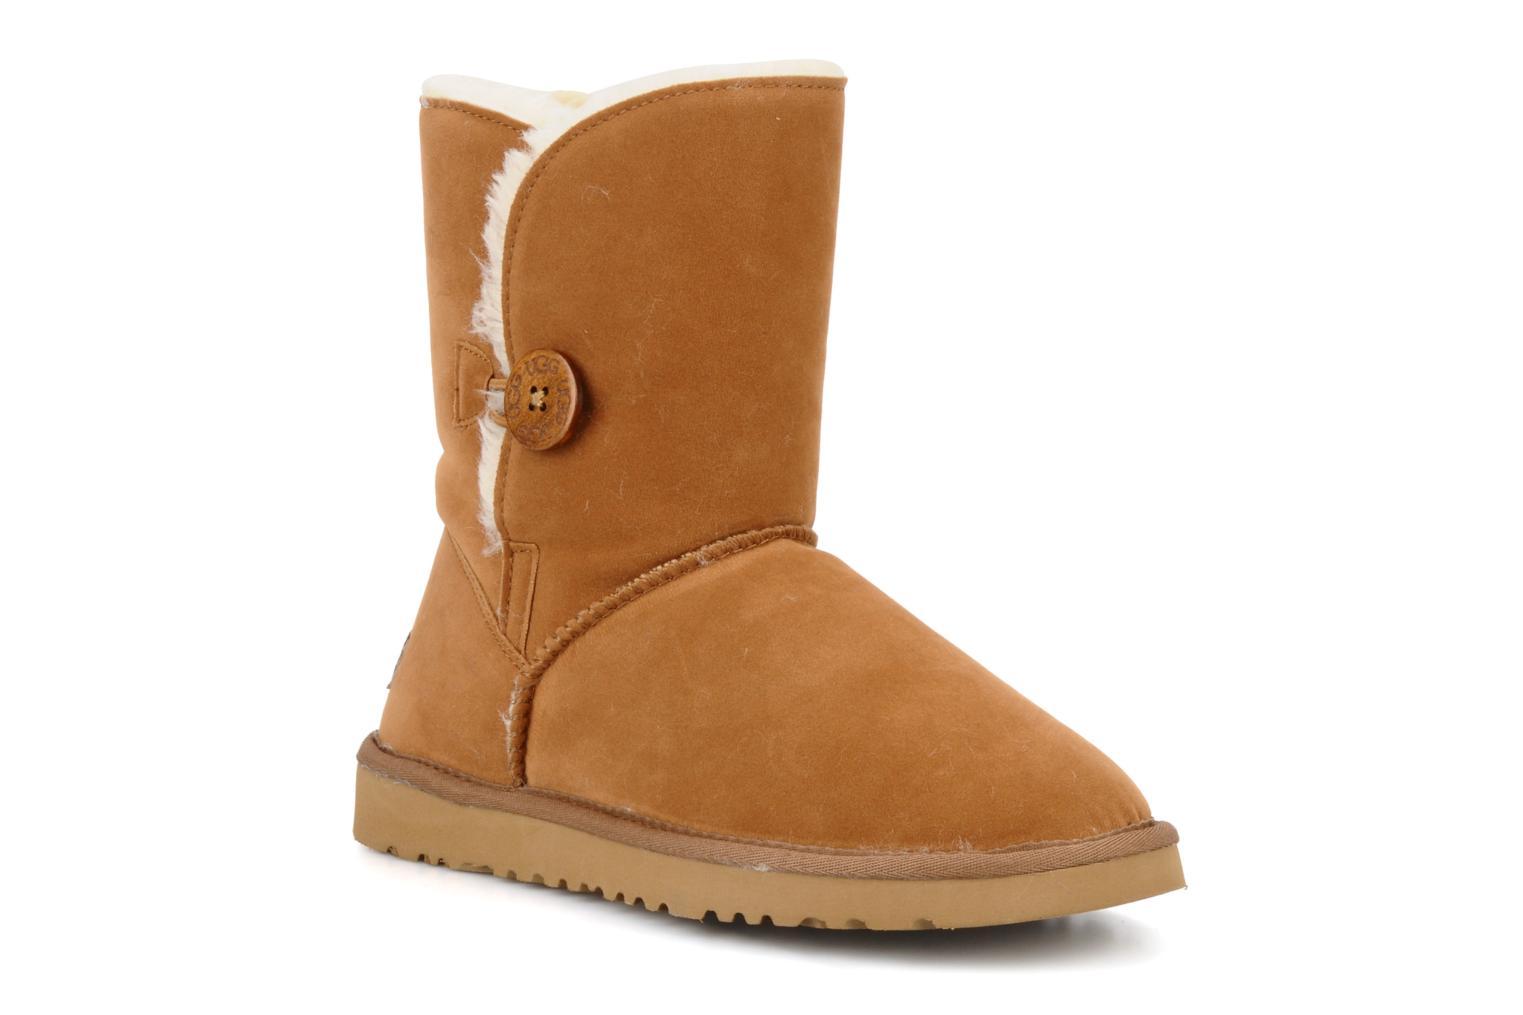 Foto Boots y Botines Ugg Australia Bailey Button Mujer